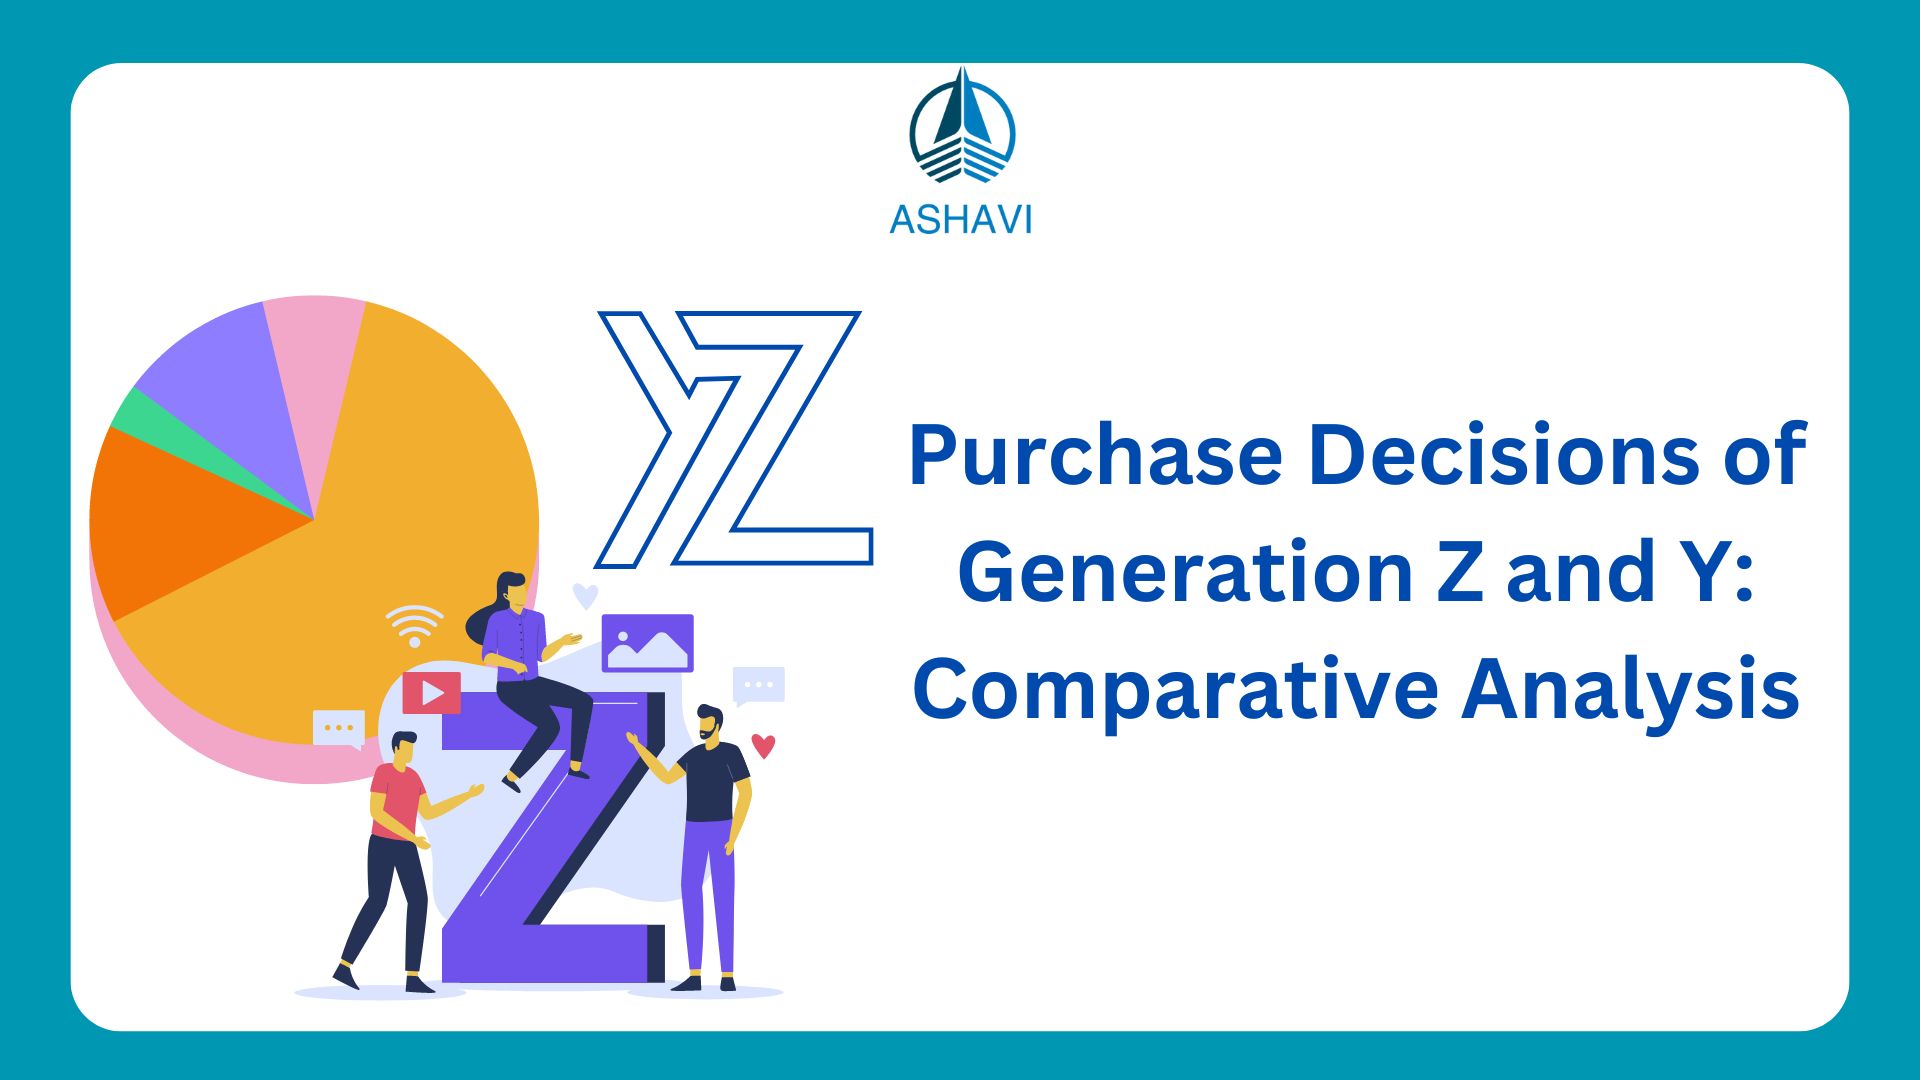 Purchase Decisions of Generation Z and Y: Comparative Analysis